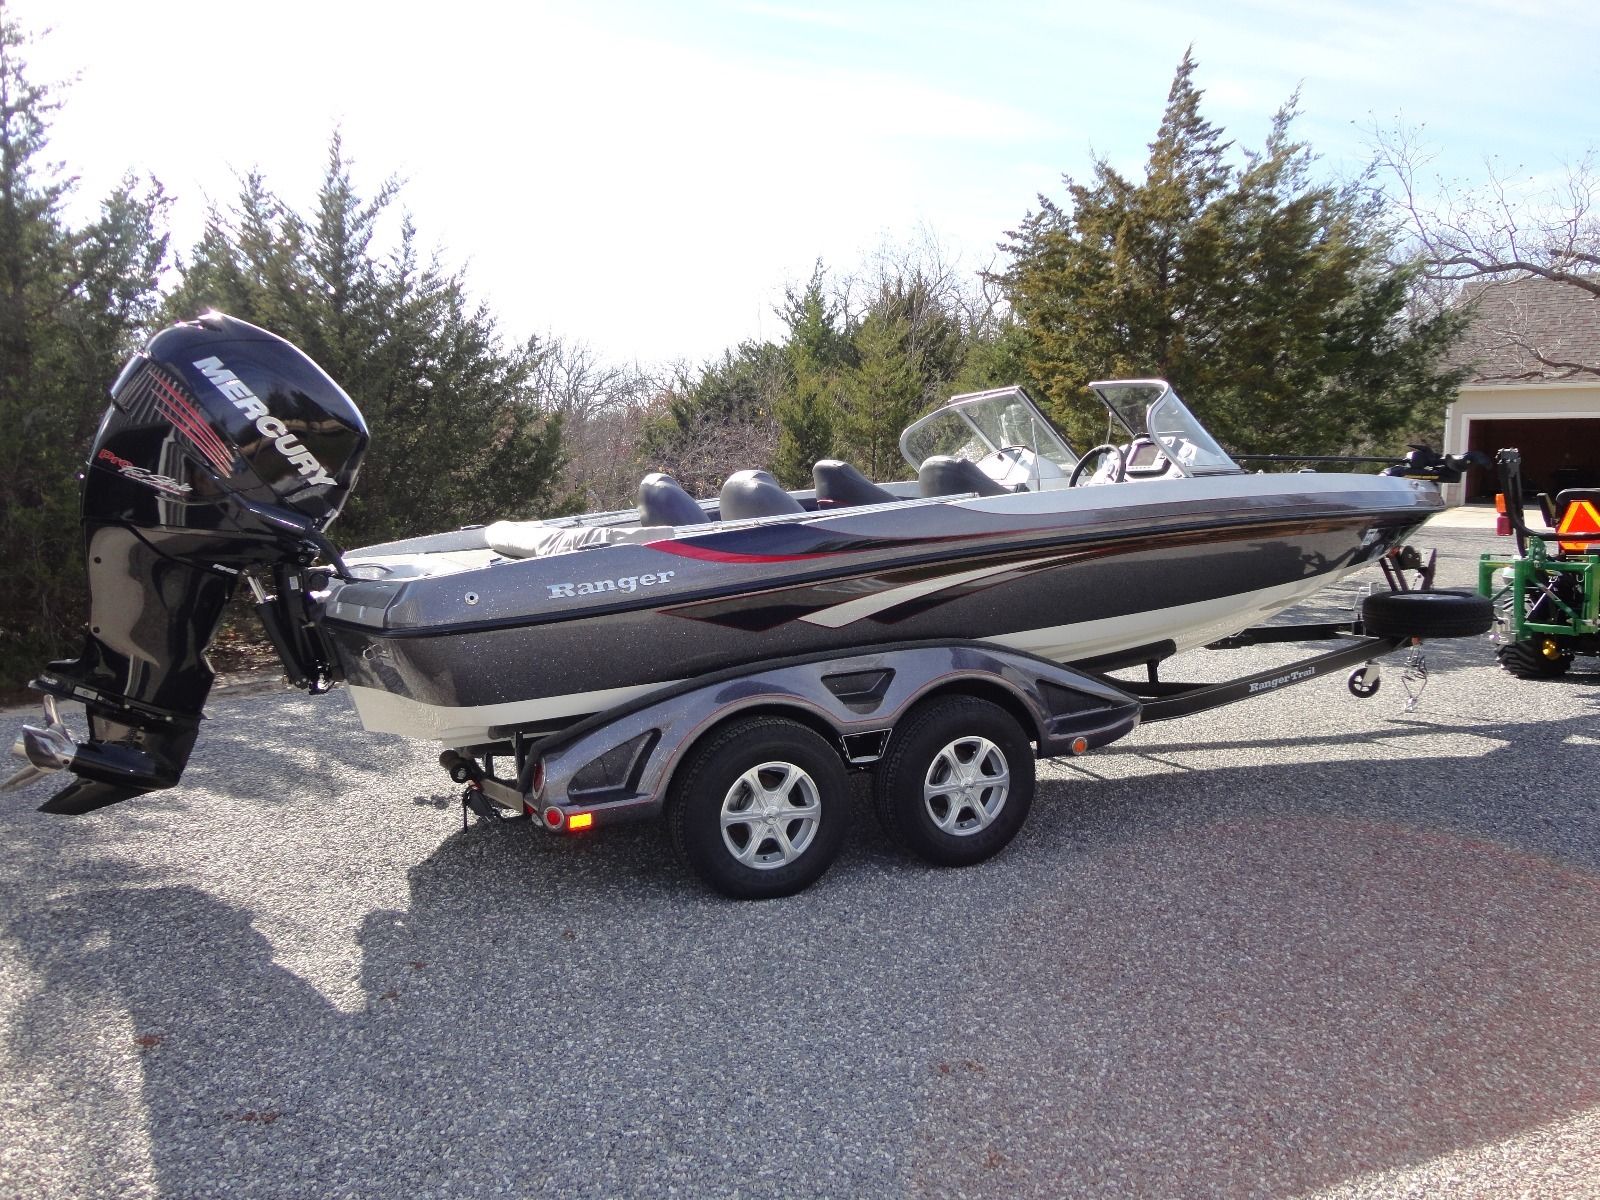 ranger 212ls 2014 for sale for $42,000 - boats-from-usa.com